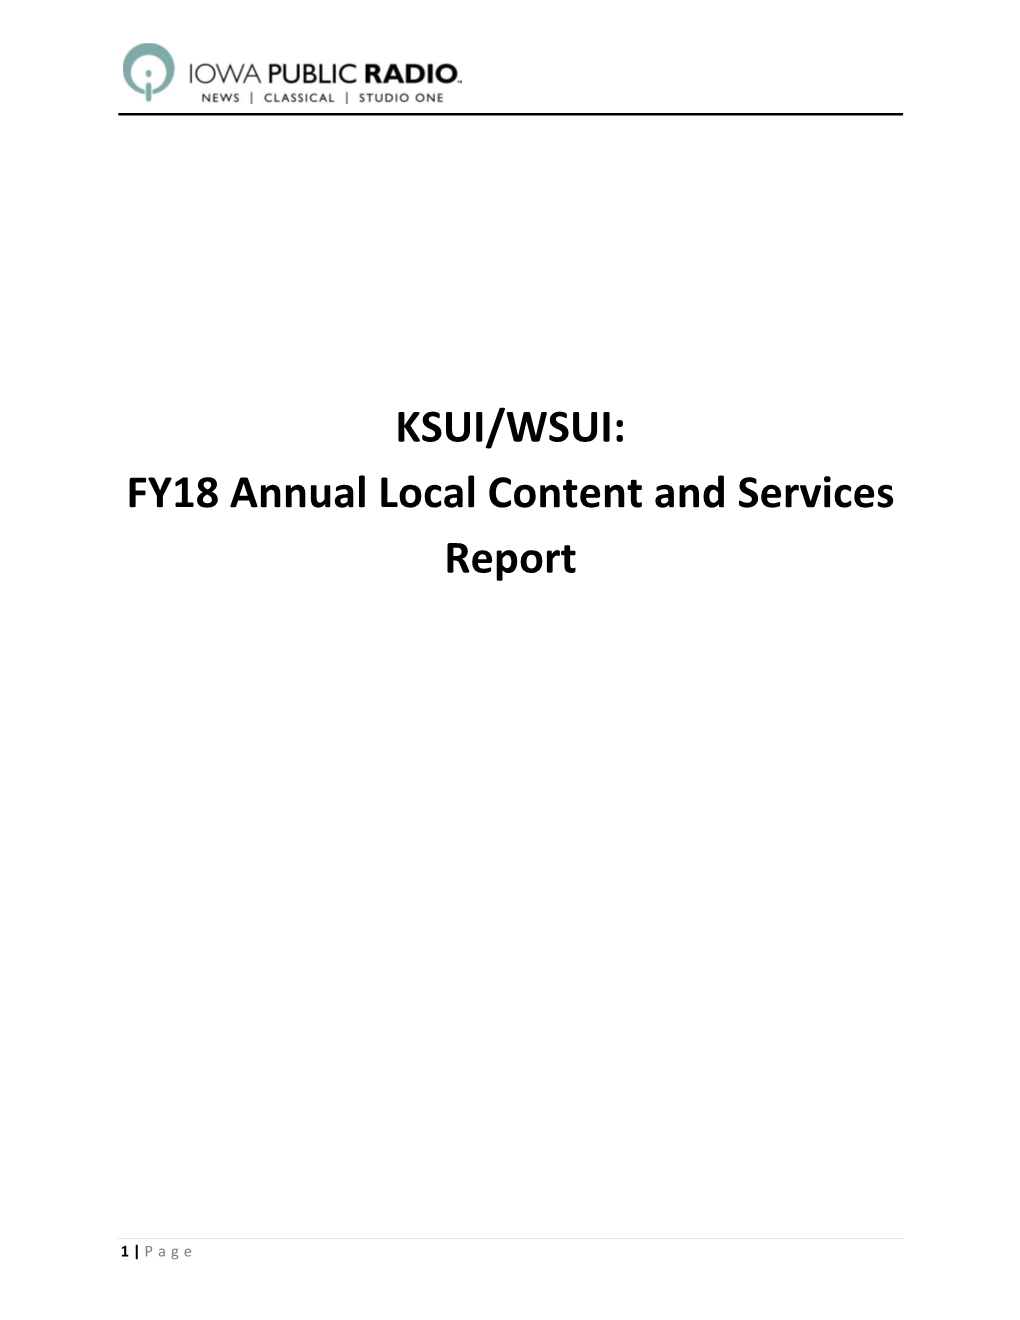 KSUI/WSUI: FY18 Annual Local Content and Services Report